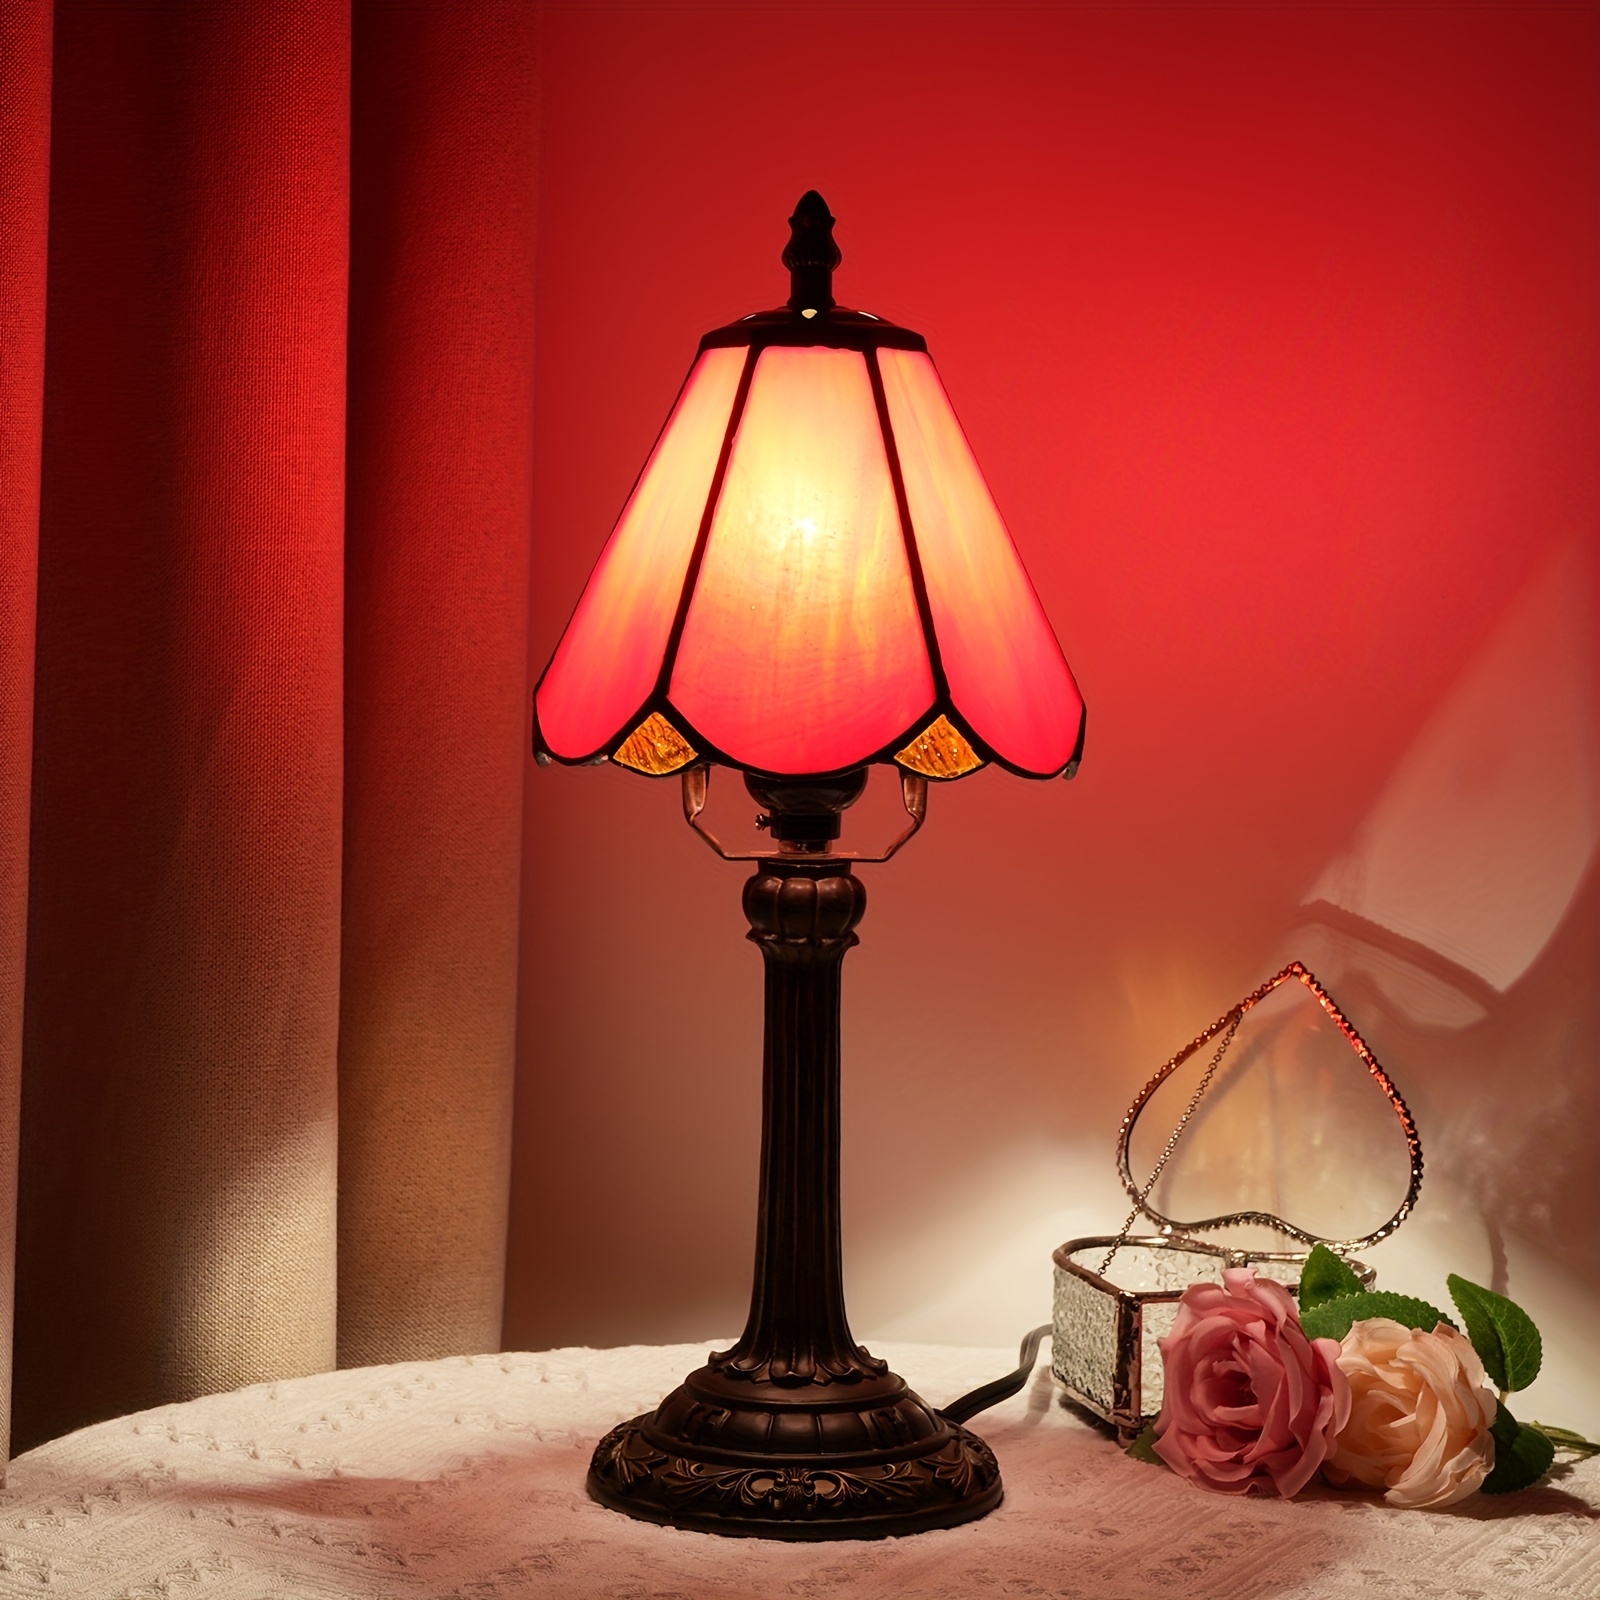 Bedside Table Lamps Modern Led Red Cloth Bedroom Home Decor Dining Table  Lighting Nordic Pull-Switch Vintage E27 Study Desk Lamp